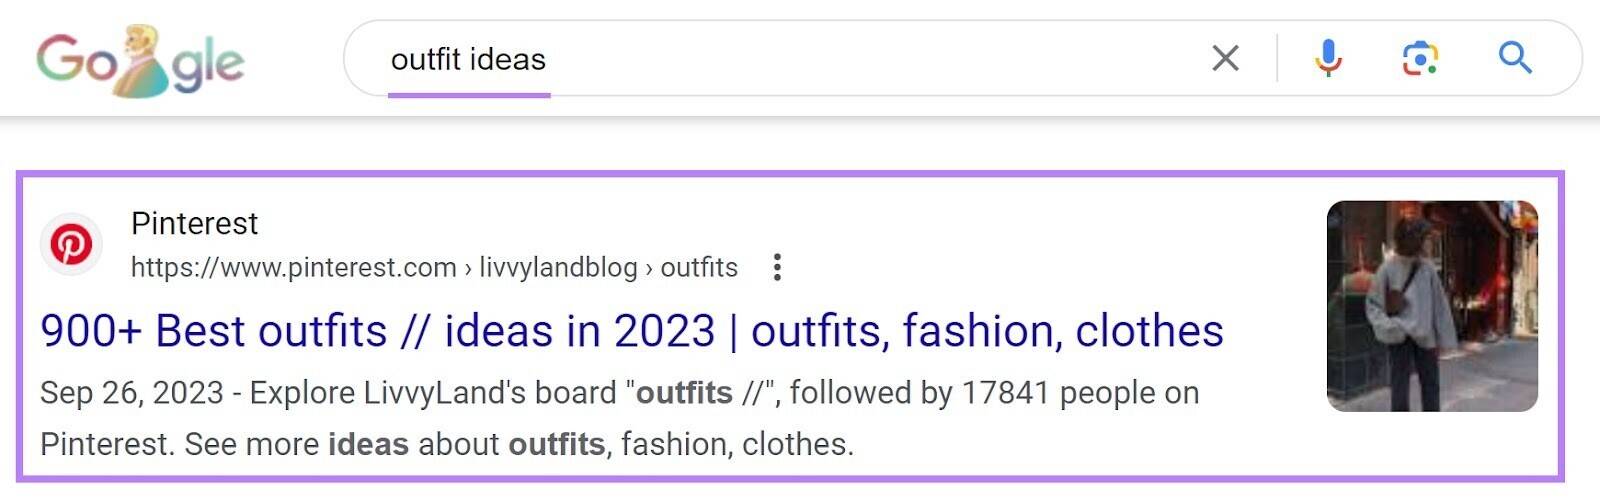 An example of Pinterest content, ranking in Google for "outfit ideas"